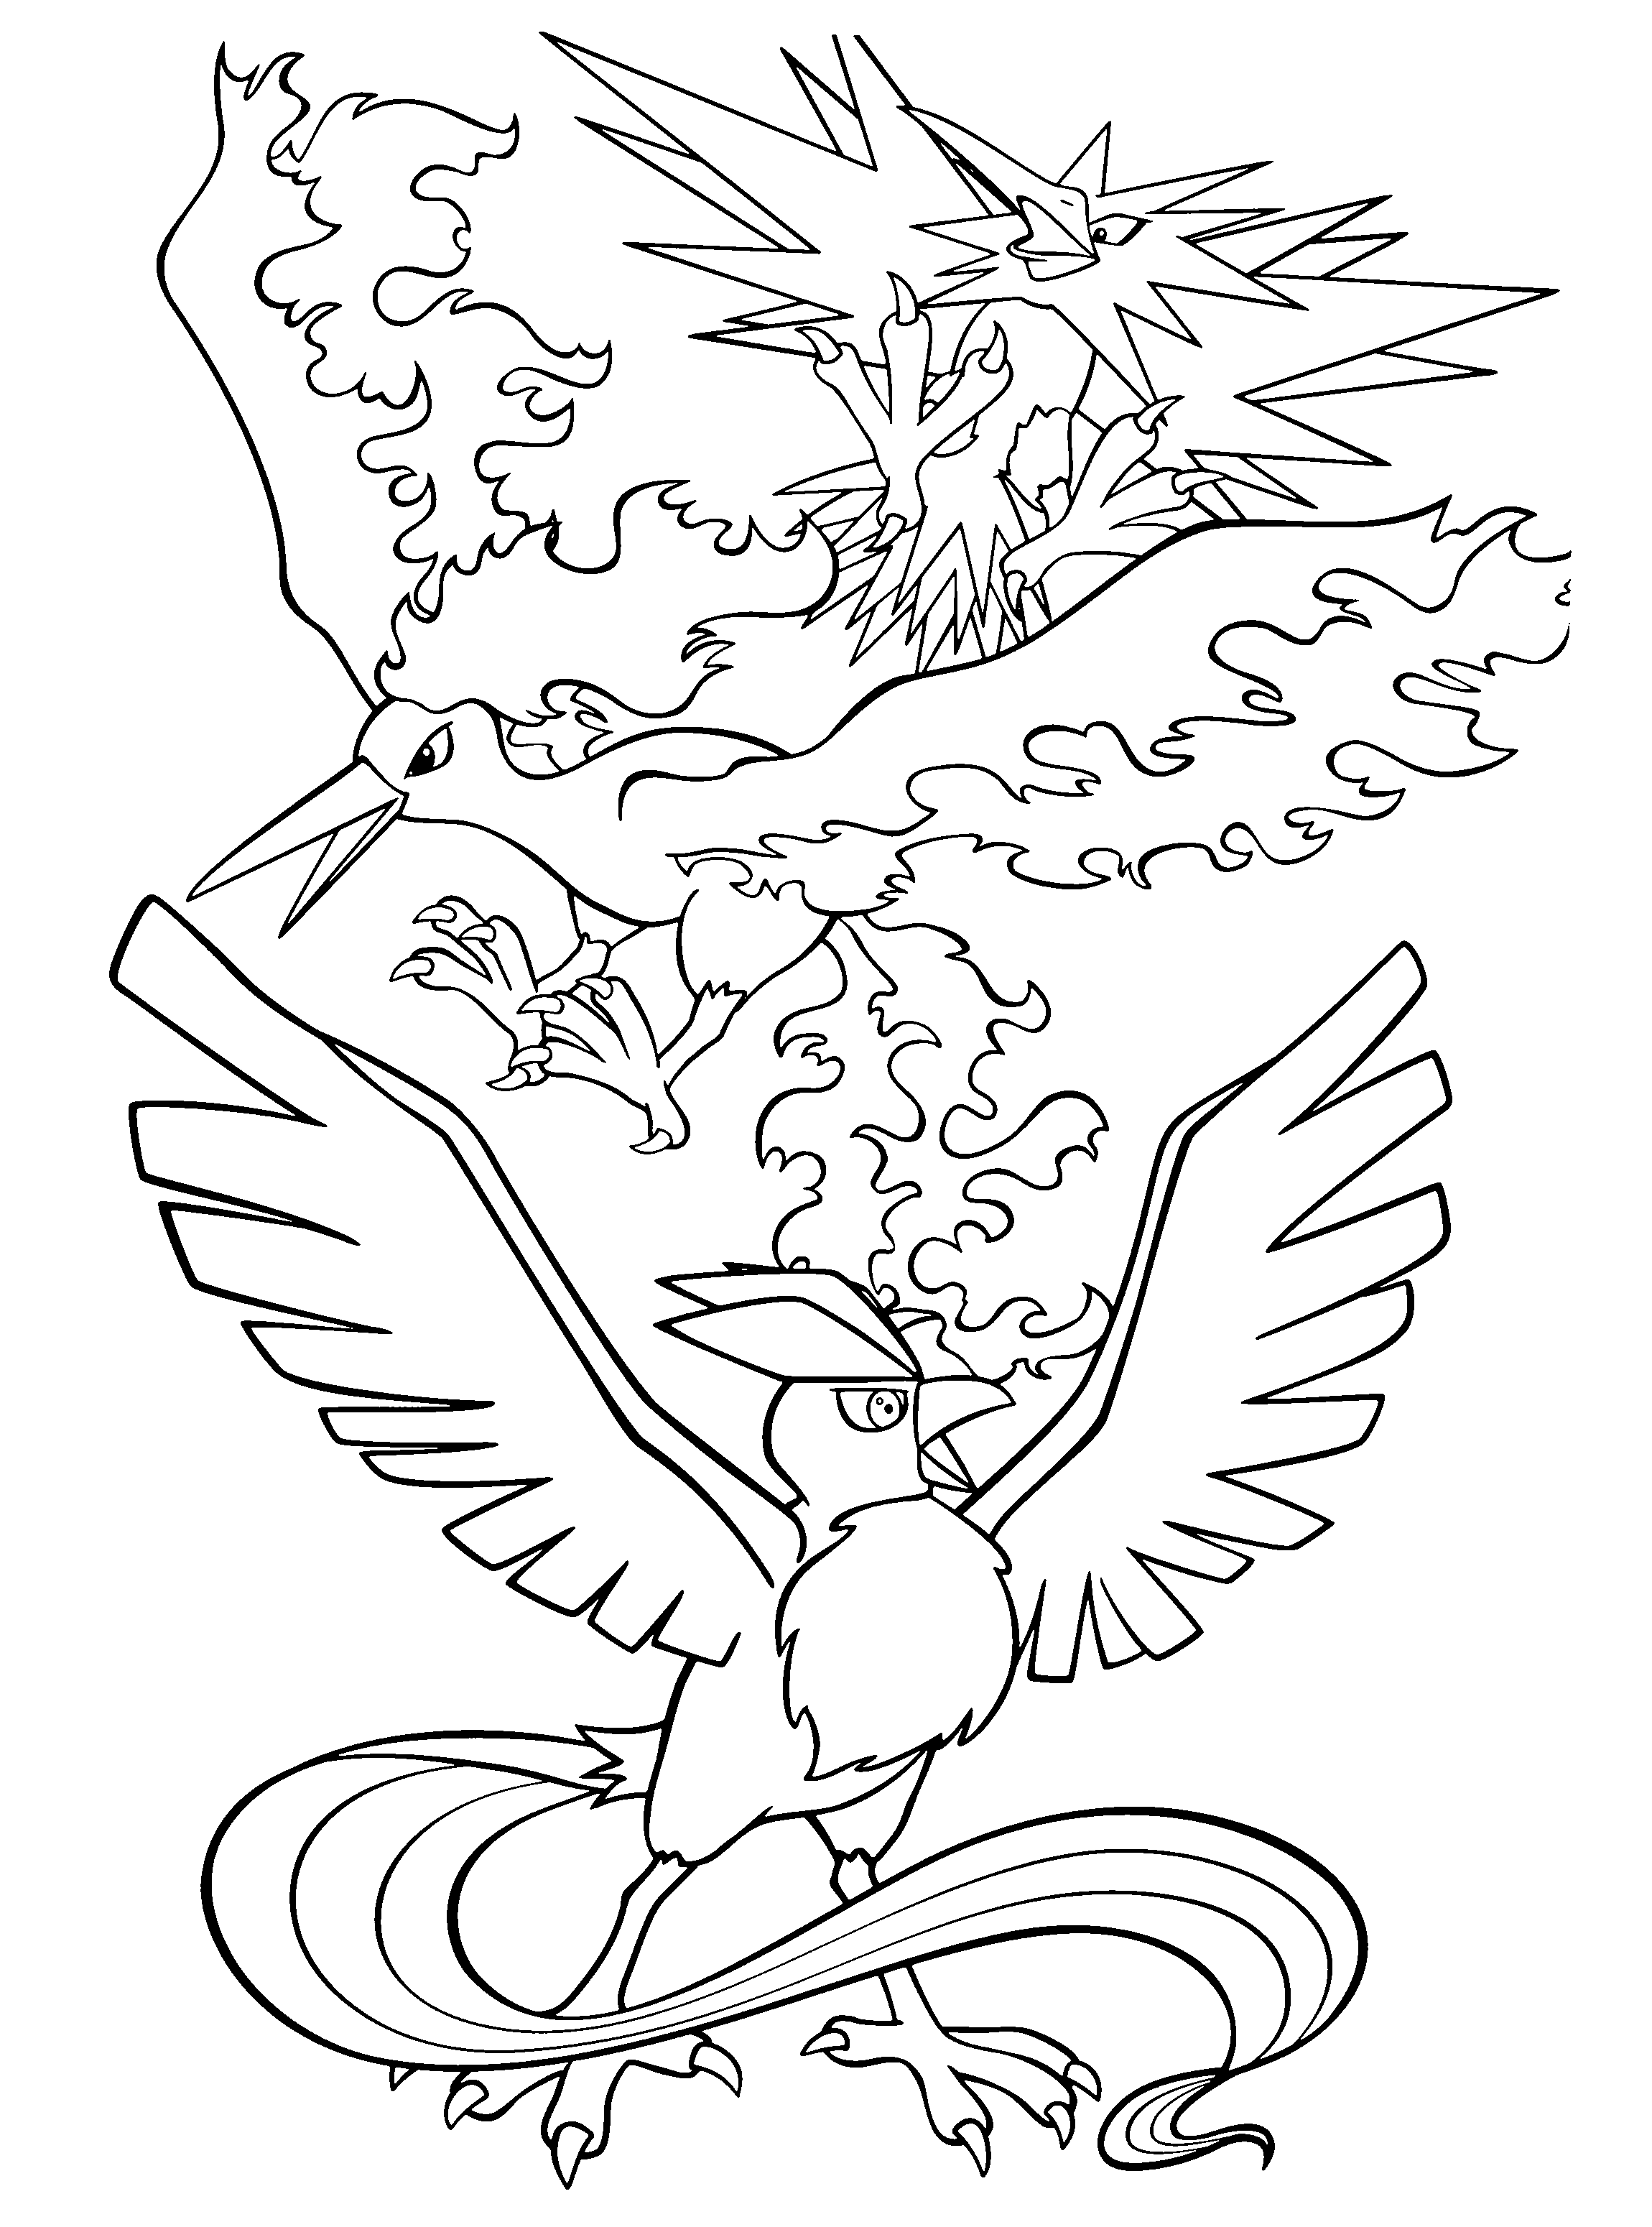 The Legendary Pokemon Colouring In Olympics Babyhook Com Pokemon Coloring Pages Pokem